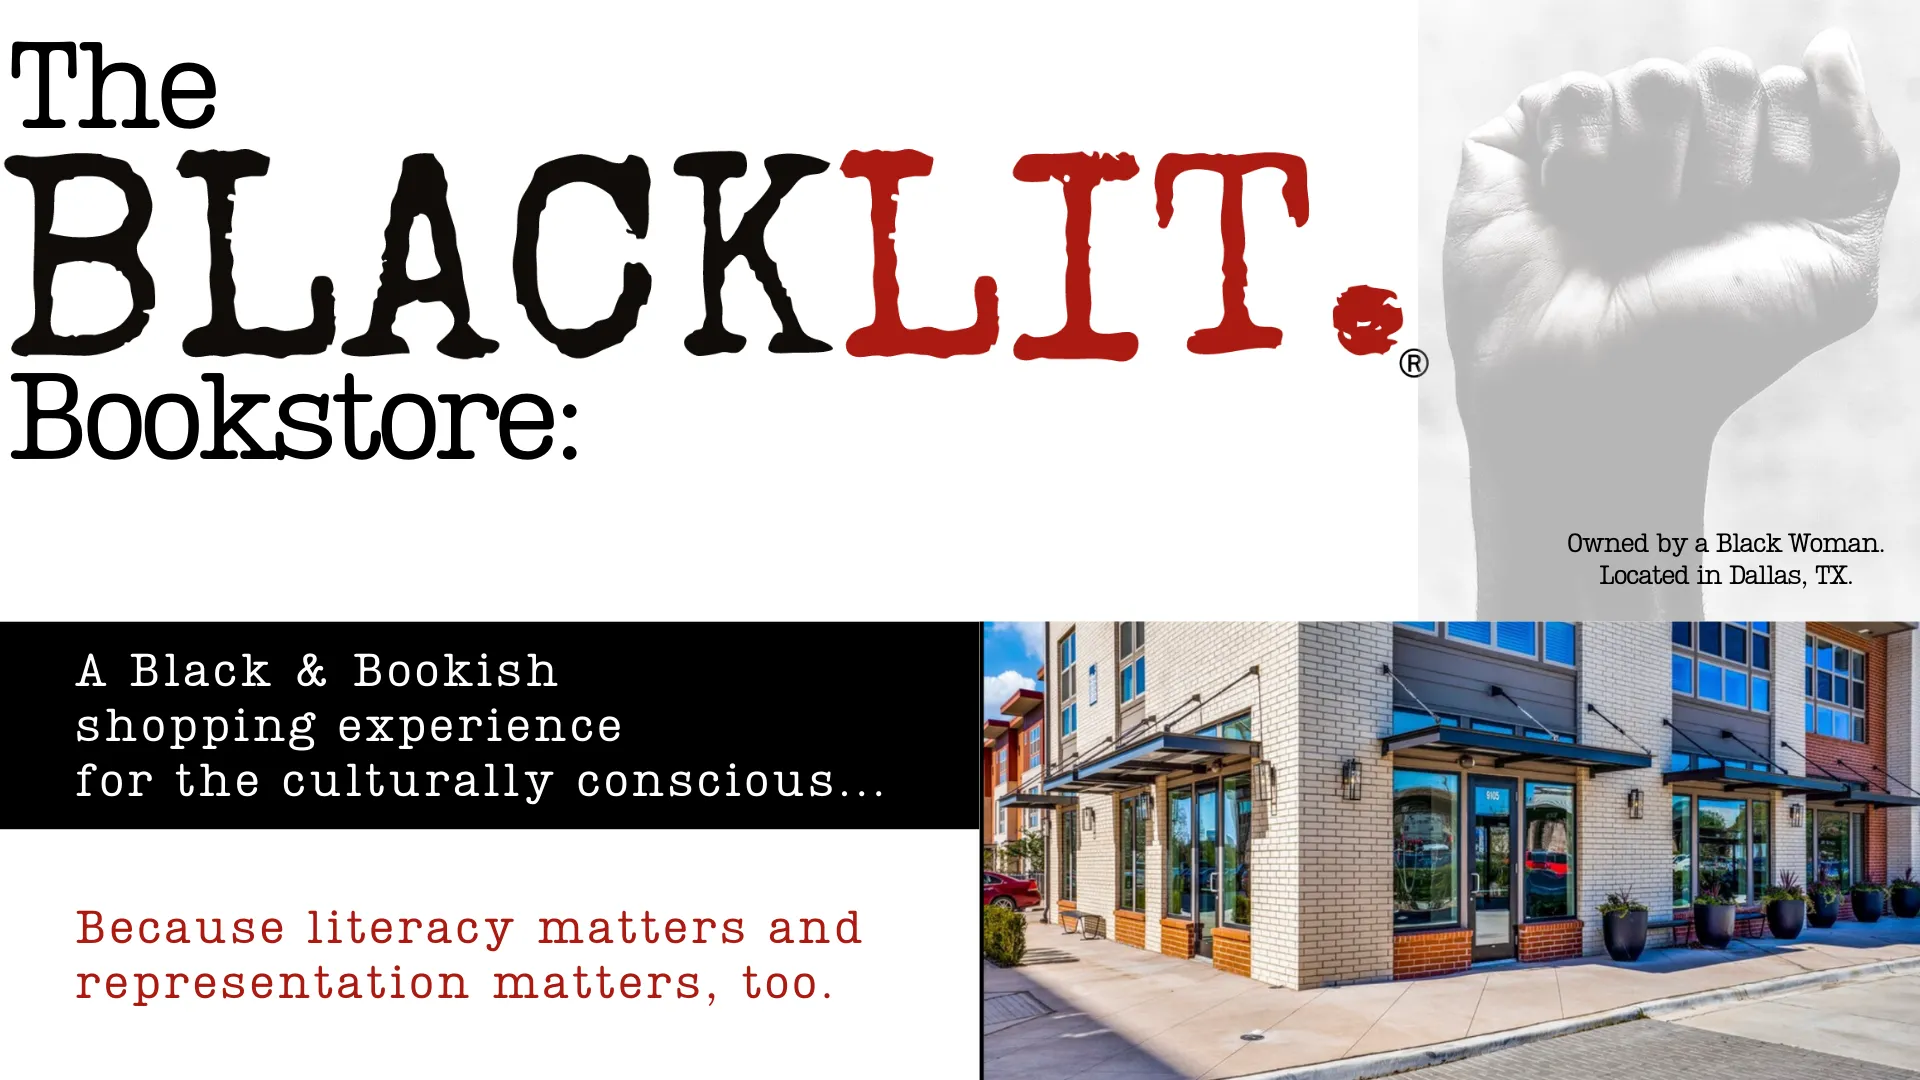 The BLACKLIT Bookstore: A Black & Bookish shopping experience for the culturally conscious... Because literacy matters and representation matters, too. Owned by a Black woman. Located in Dallas, TX